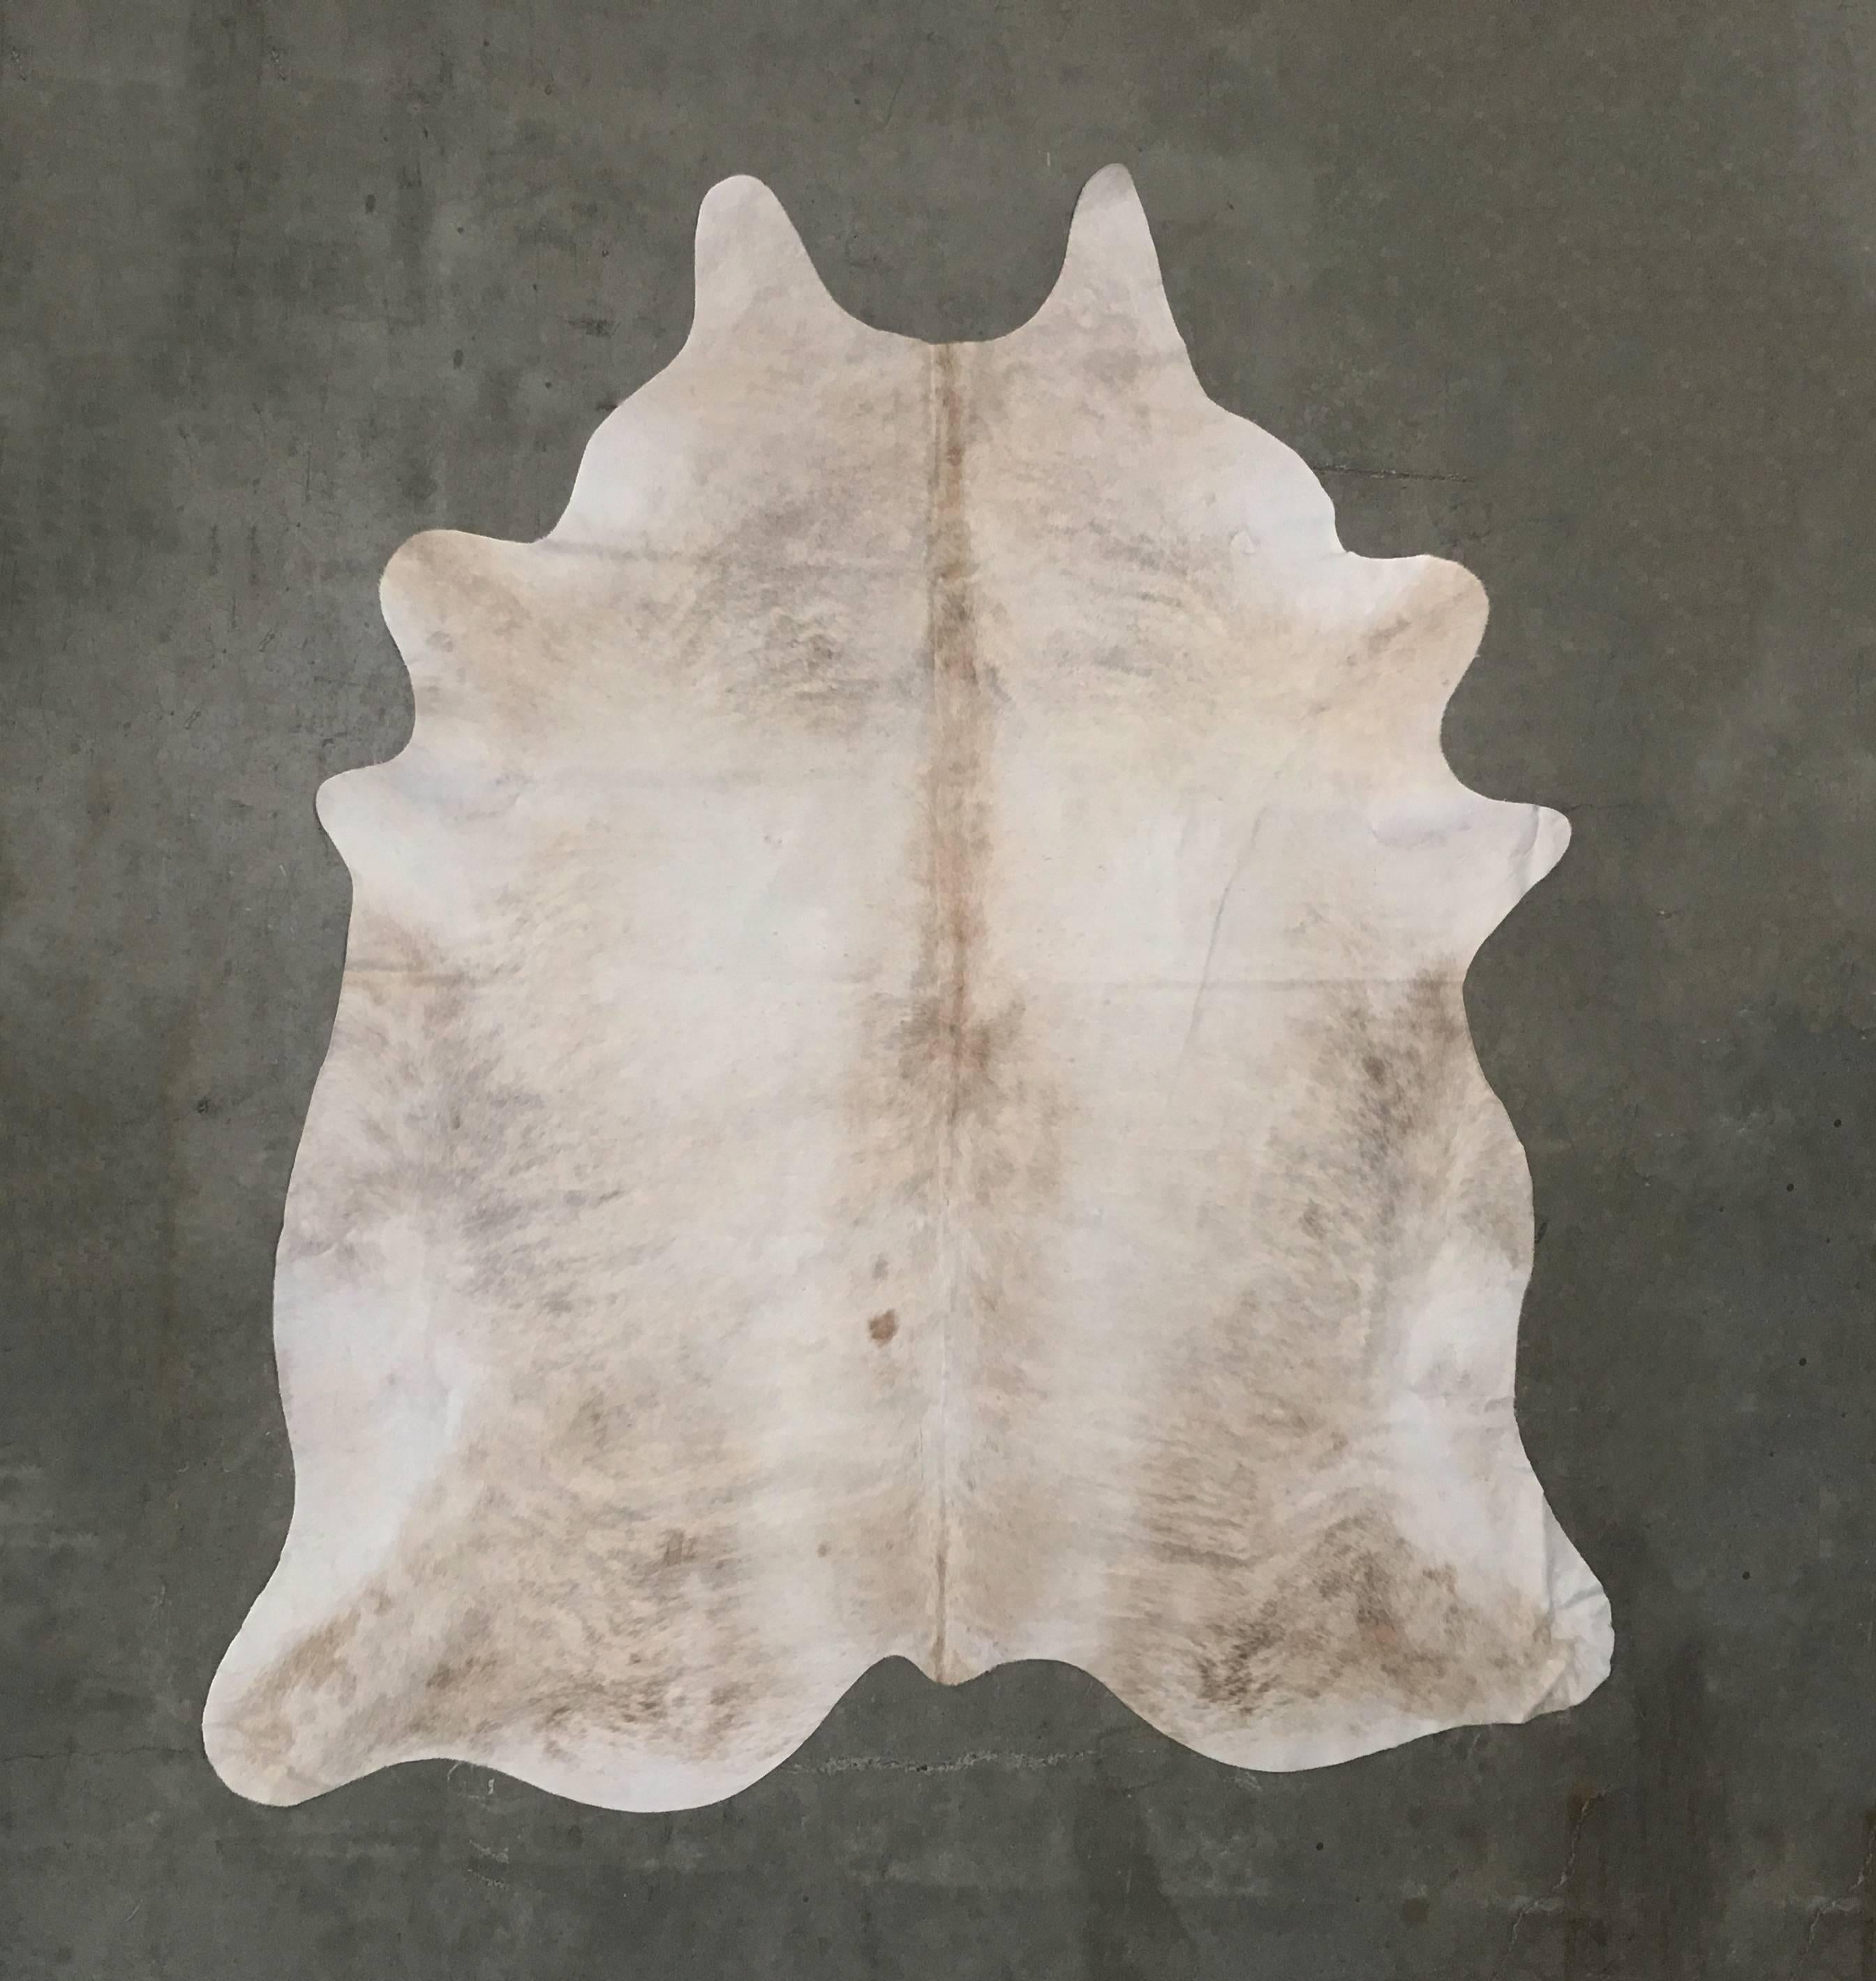 Natural silver cow hide rug. Pale grey with areas of pale brown and fawn.

Photograph depicts typical features of silver hides, and ordered hide rug will vary based on availability. Please inquire for images of individual available hides prior to